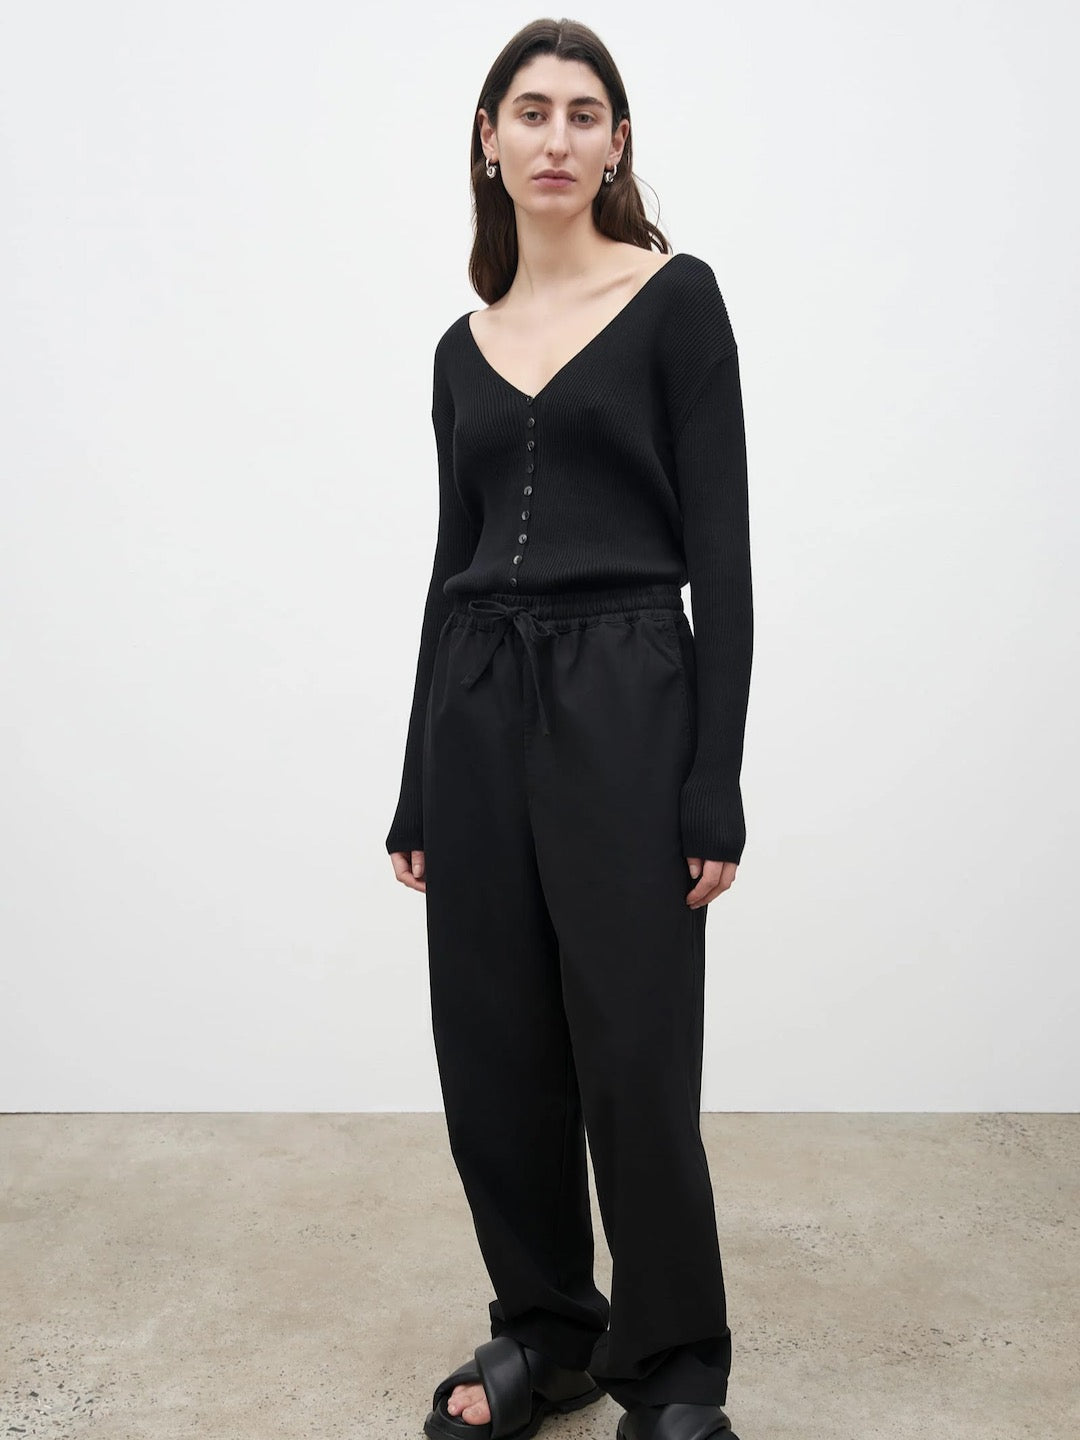 The model is wearing a black v - neck sweater and Kowtow&#39;s Blake Pants – Black.